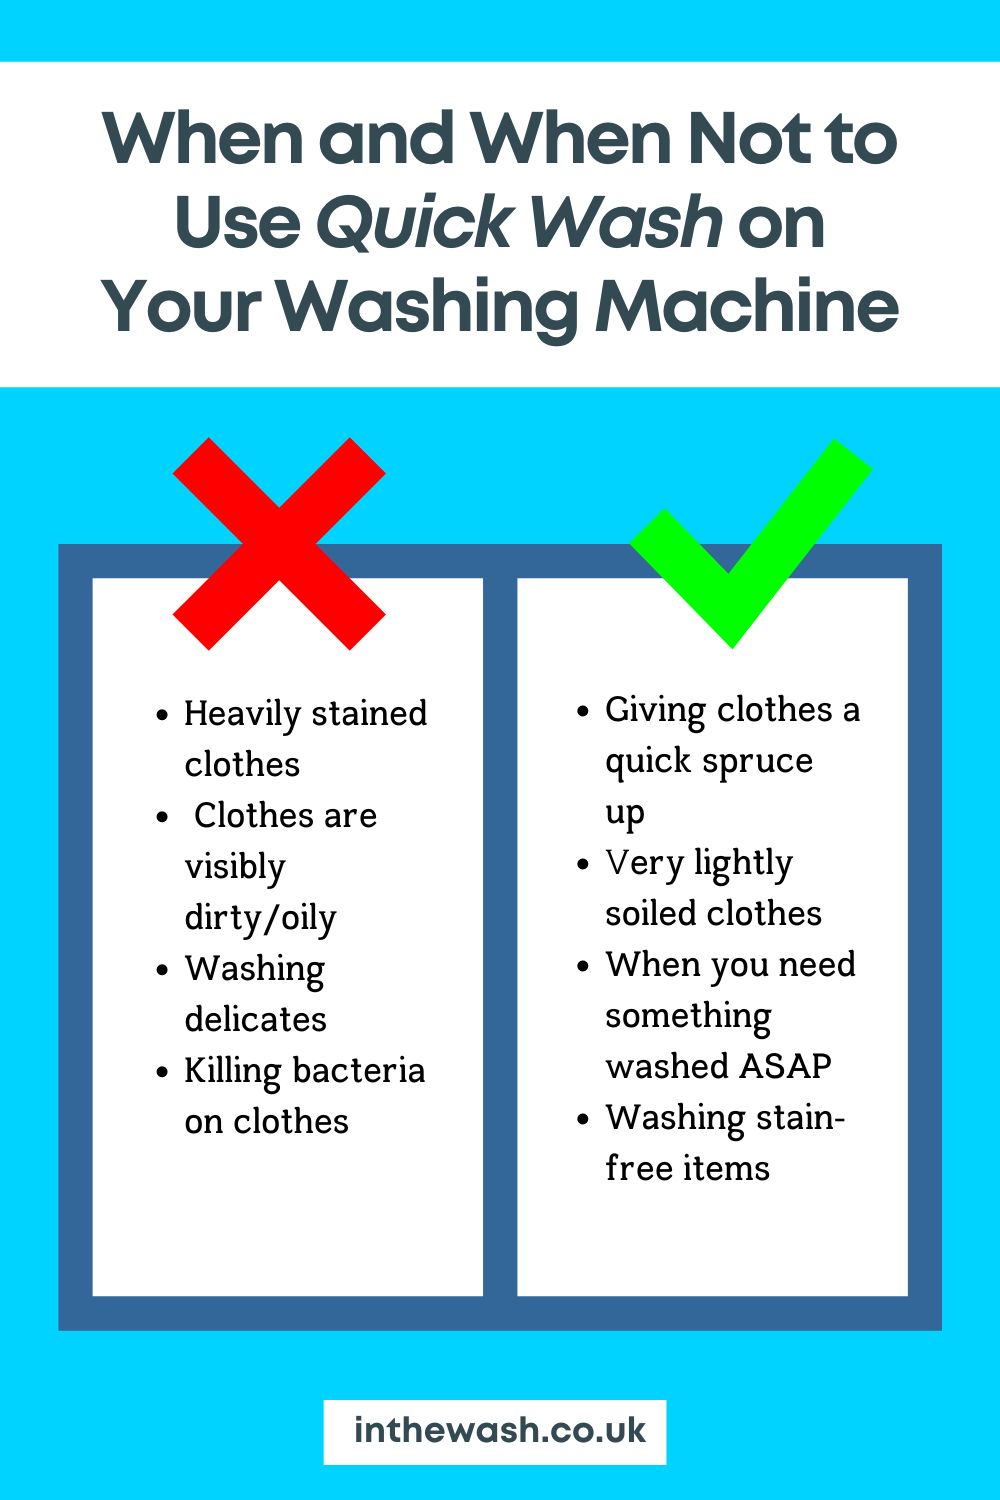 When and when not to use quick wash on your washing machine